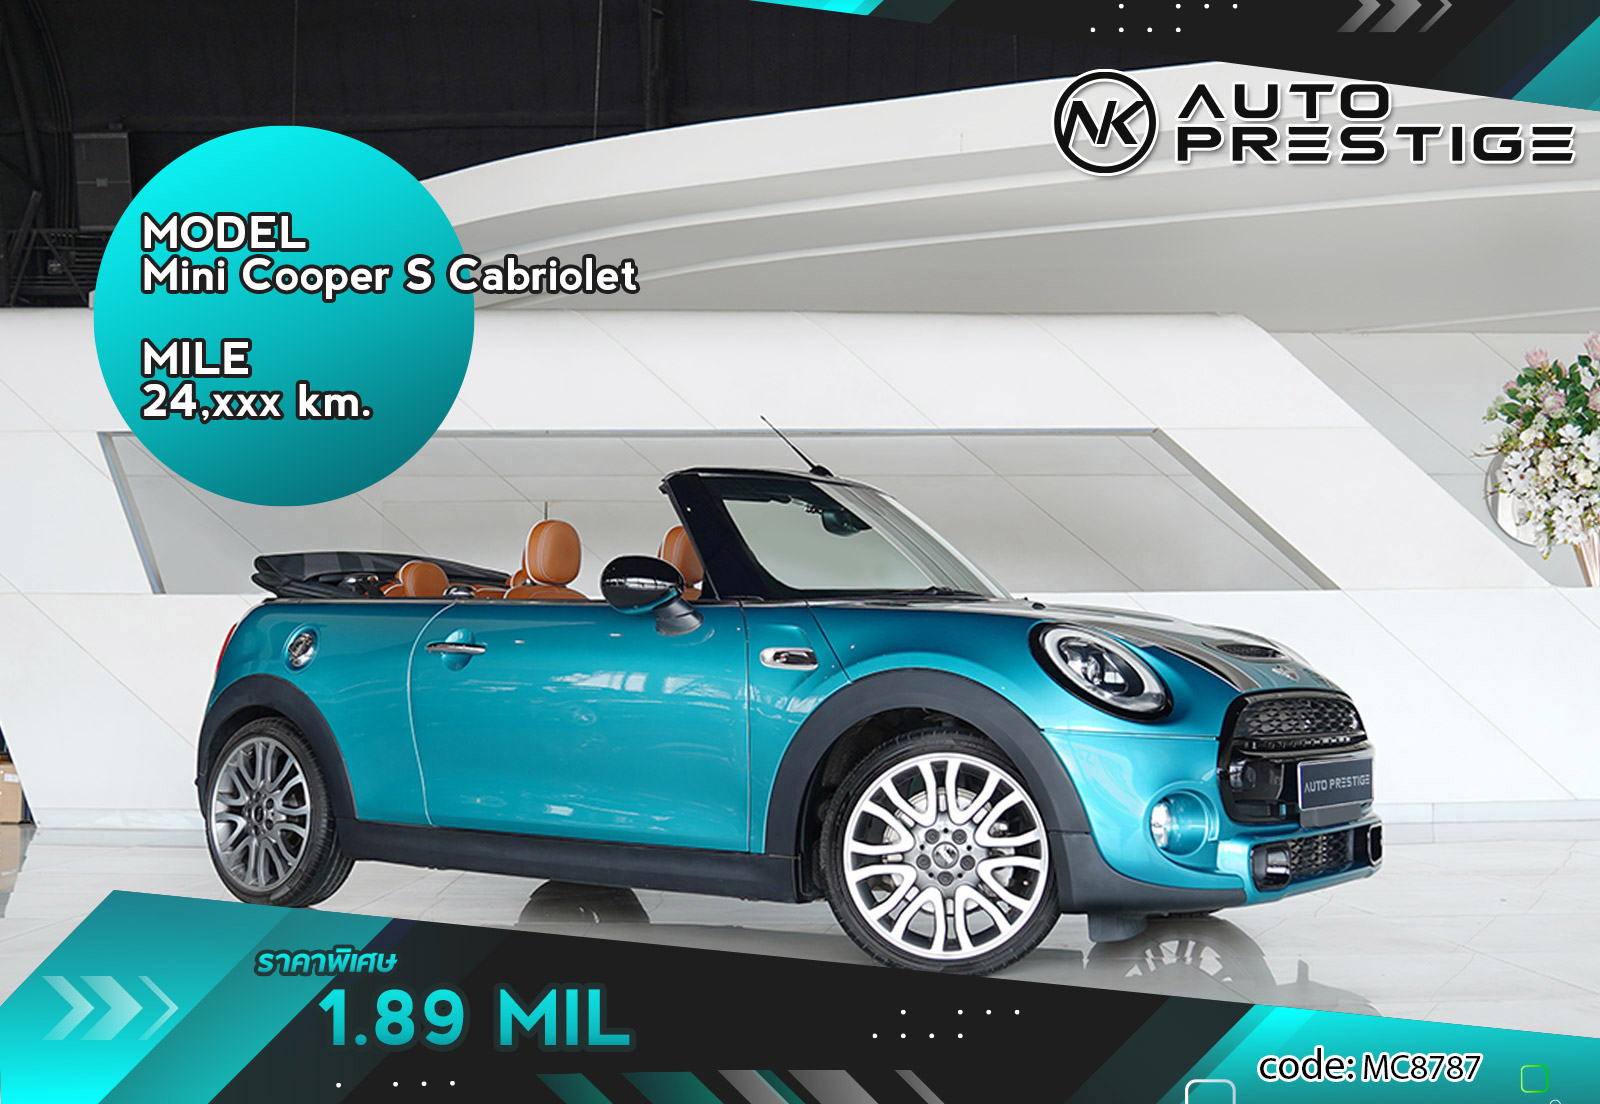 Mini Cooper S Cabriolet Other Brand